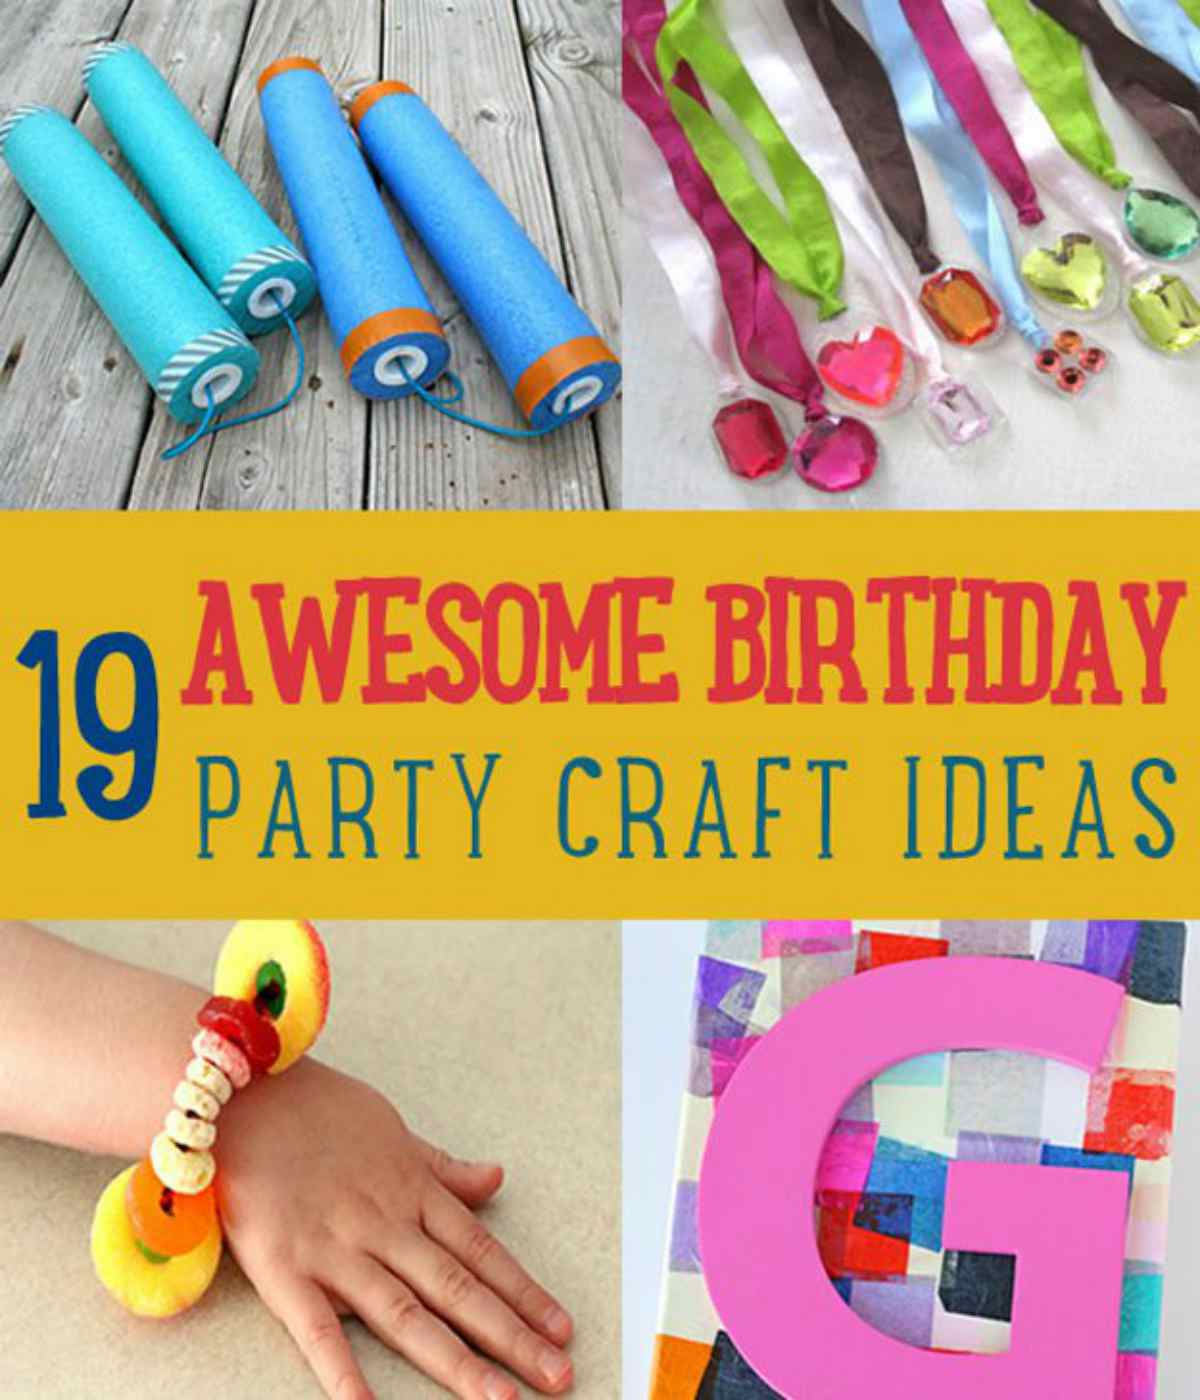 Awesome Birthday Party Craft Ideas | The Best Kids' Party Ideas For All Occasion